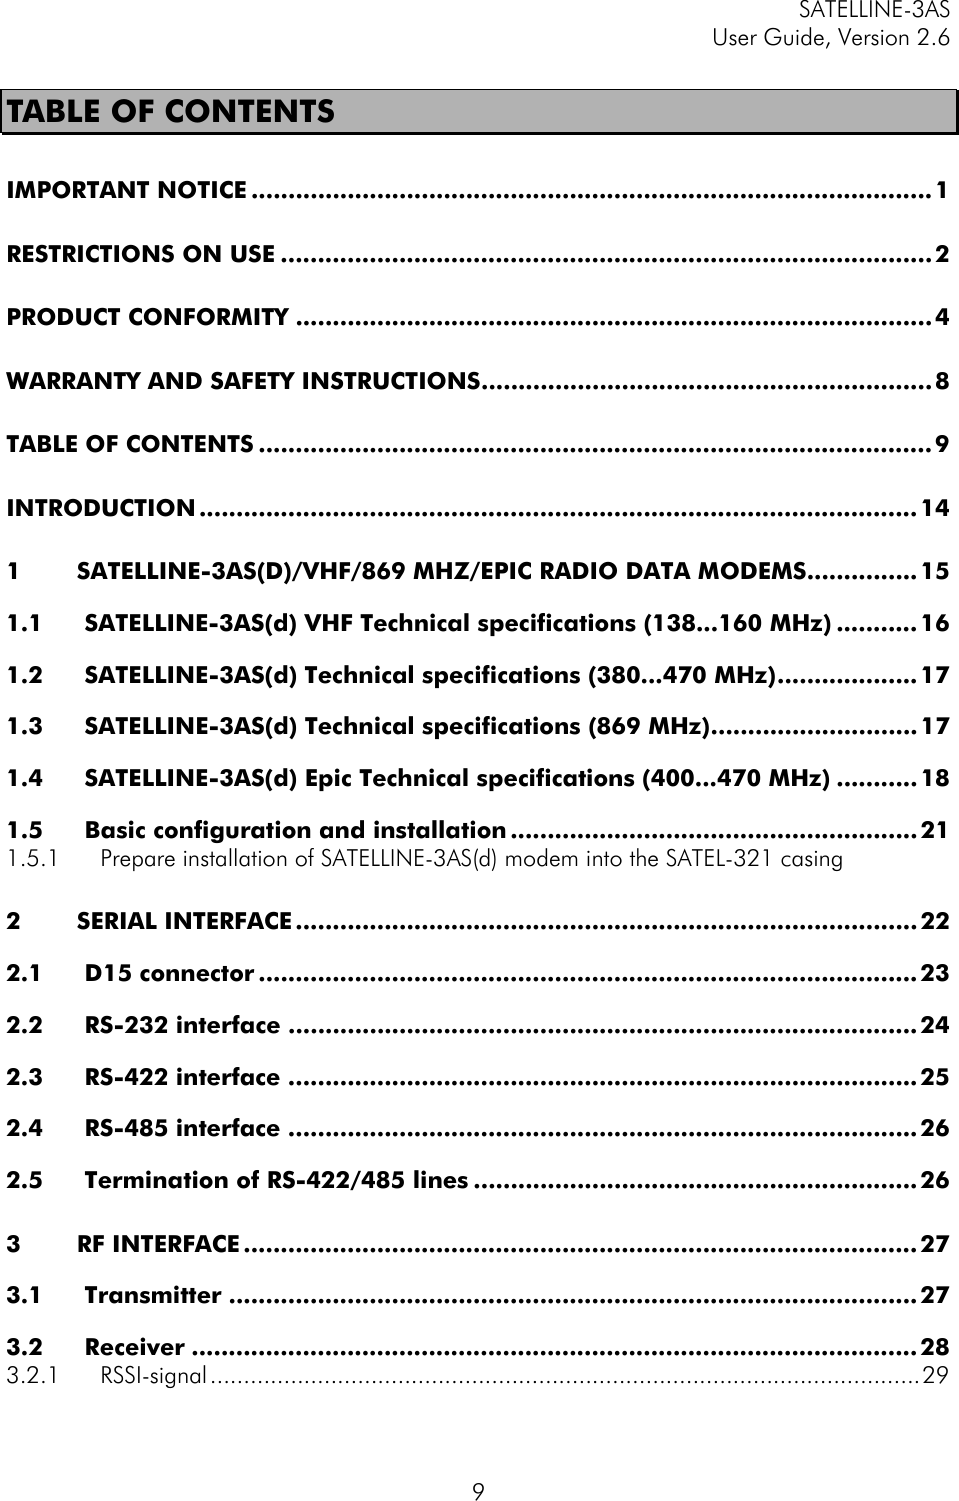 SATELLINE-3AS User Guide, Version 2.6   9TABLE OF CONTENTS IMPORTANT NOTICE ............................................................................................1 RESTRICTIONS ON USE ........................................................................................ 2 PRODUCT CONFORMITY ...................................................................................... 4 WARRANTY AND SAFETY INSTRUCTIONS.............................................................8 TABLE OF CONTENTS ........................................................................................... 9 INTRODUCTION ................................................................................................. 14 1 SATELLINE-3AS(D)/VHF/869 MHZ/EPIC RADIO DATA MODEMS...............15 1.1 SATELLINE-3AS(d) VHF Technical specifications (138...160 MHz) ...........16 1.2 SATELLINE-3AS(d) Technical specifications (380...470 MHz)................... 17 1.3 SATELLINE-3AS(d) Technical specifications (869 MHz)............................ 17 1.4 SATELLINE-3AS(d) Epic Technical specifications (400...470 MHz) ........... 18 1.5 Basic configuration and installation ....................................................... 21 1.5.1 Prepare installation of SATELLINE-3AS(d) modem into the SATEL-321 casing 2 SERIAL INTERFACE.................................................................................... 22 2.1 D15 connector ......................................................................................... 23 2.2 RS-232 interface ..................................................................................... 24 2.3 RS-422 interface ..................................................................................... 25 2.4 RS-485 interface ..................................................................................... 26 2.5 Termination of RS-422/485 lines ............................................................ 26 3 RF INTERFACE ........................................................................................... 27 3.1 Transmitter ............................................................................................. 27 3.2 Receiver .................................................................................................. 28 3.2.1 RSSI-signal..........................................................................................................29 